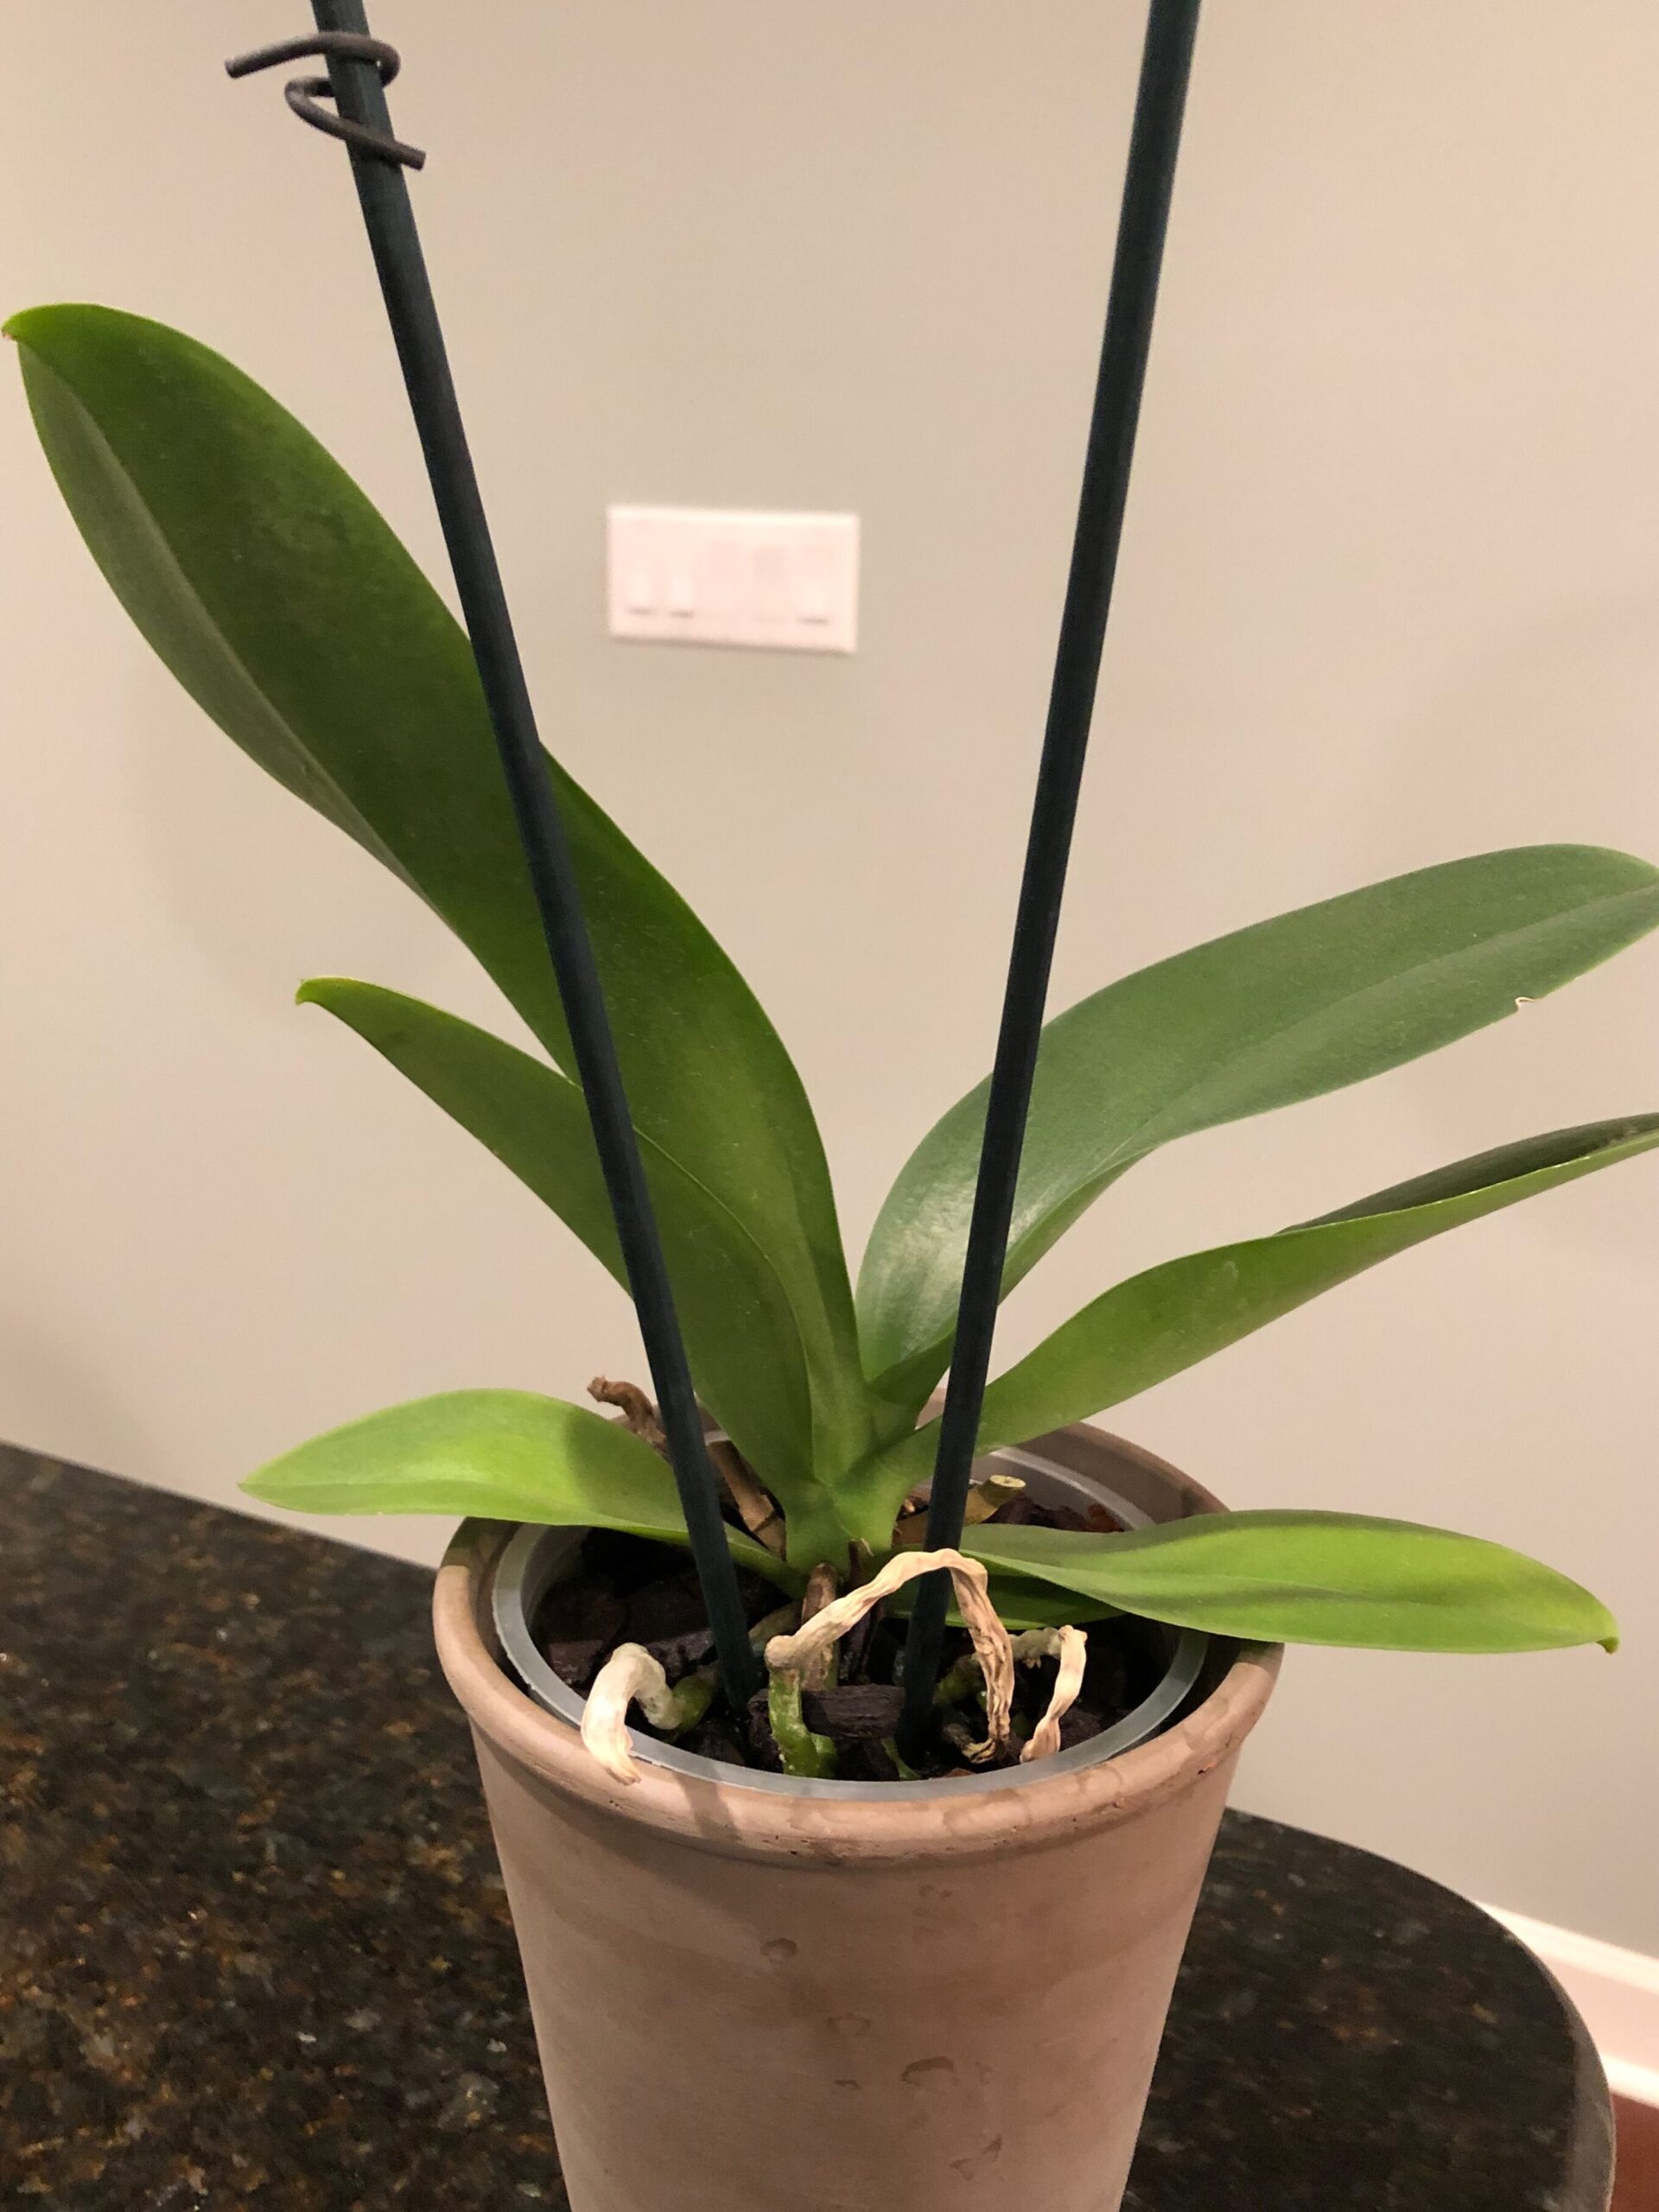 https://www.aos.org/orchids/orchid-care/where-in-the-house-can-i-grow-my-orchid.aspx